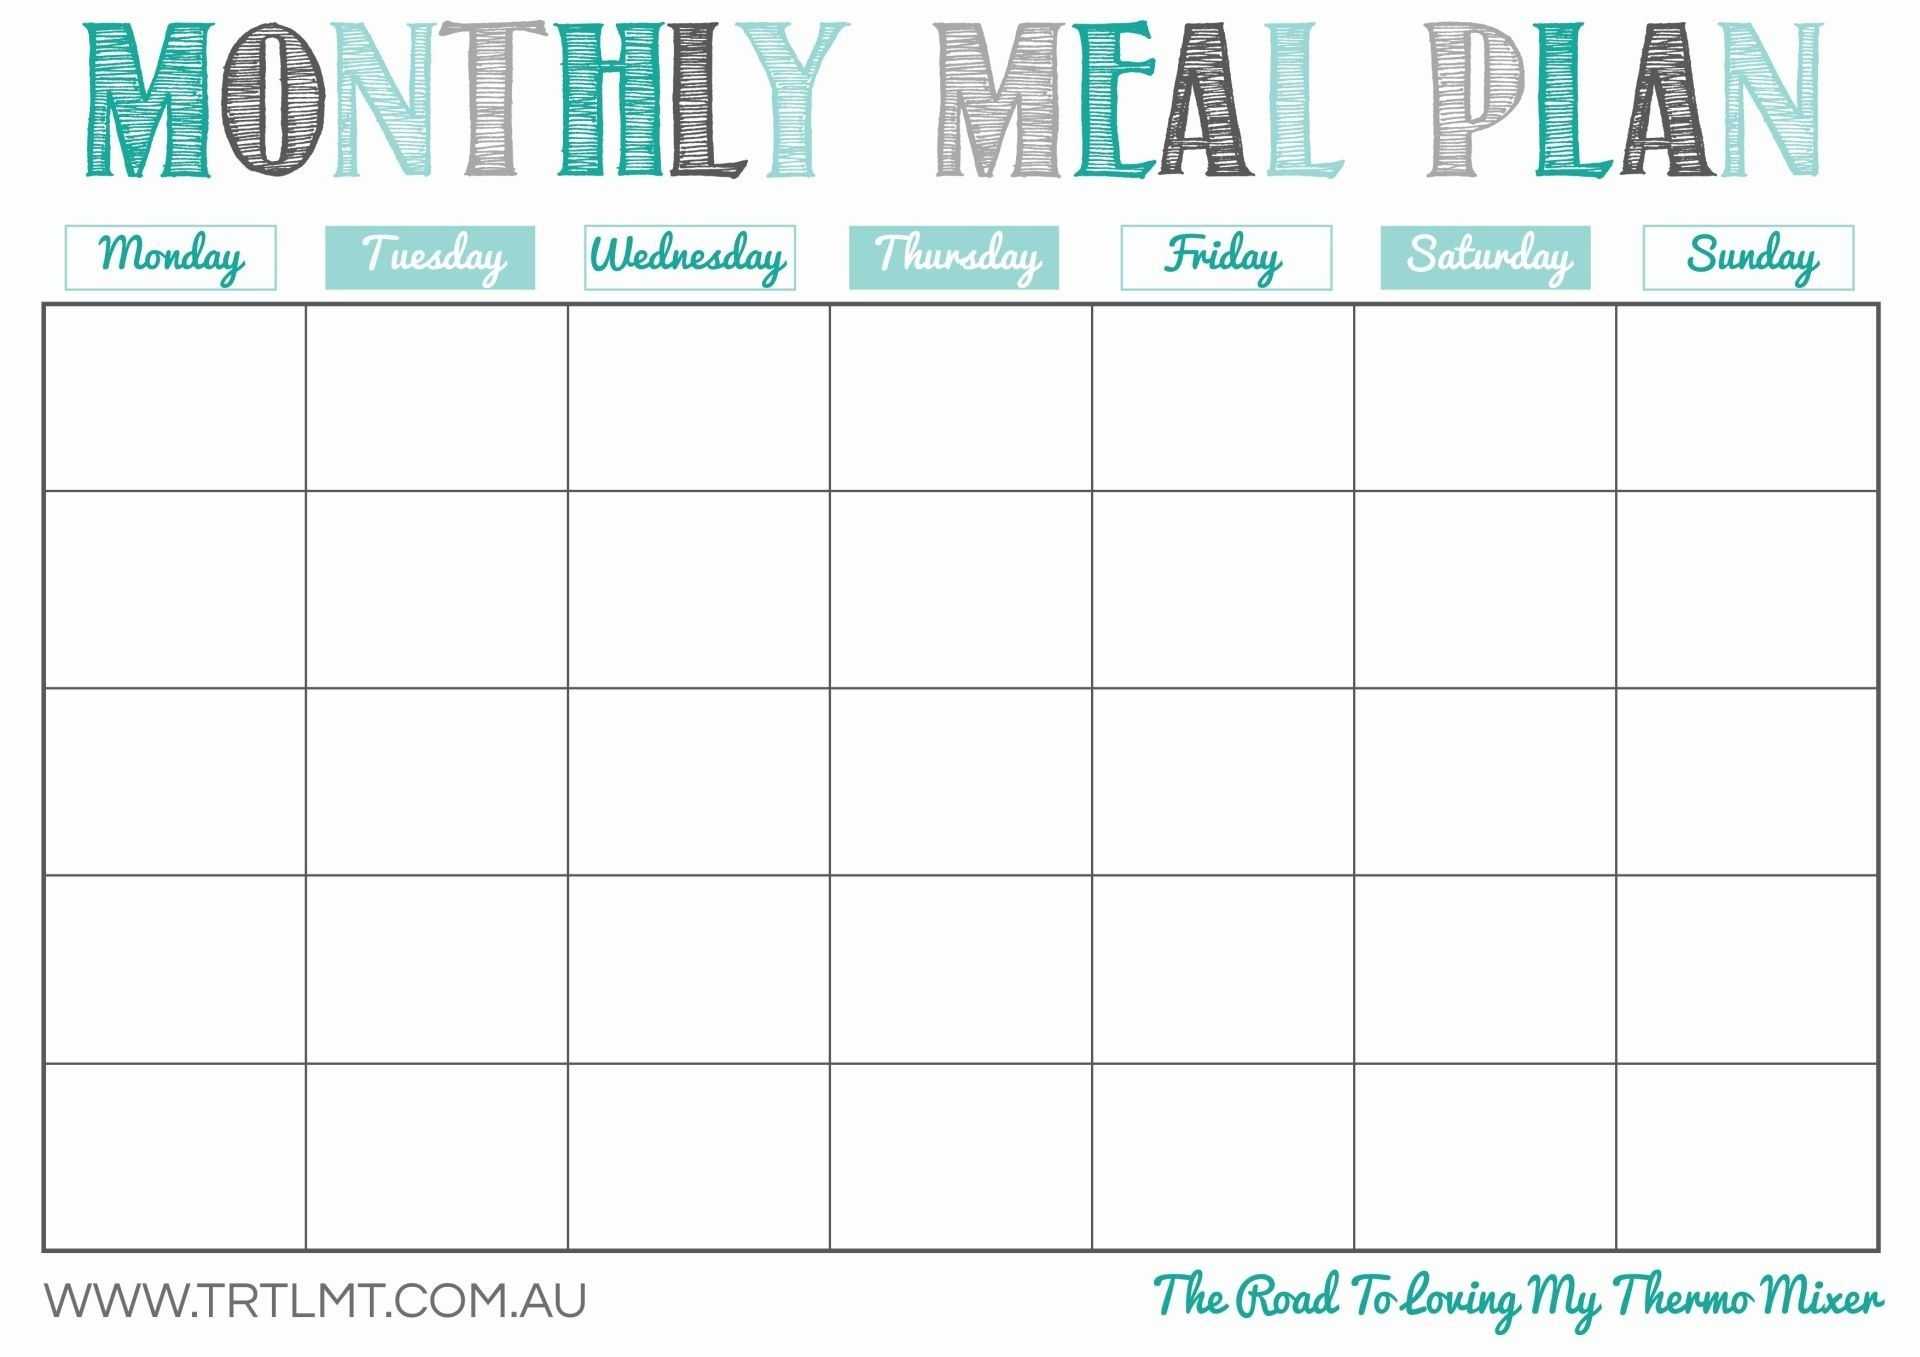 Monthly Meal Plan Printable | Template Business Psd, Excel For Meal Plan Template Word